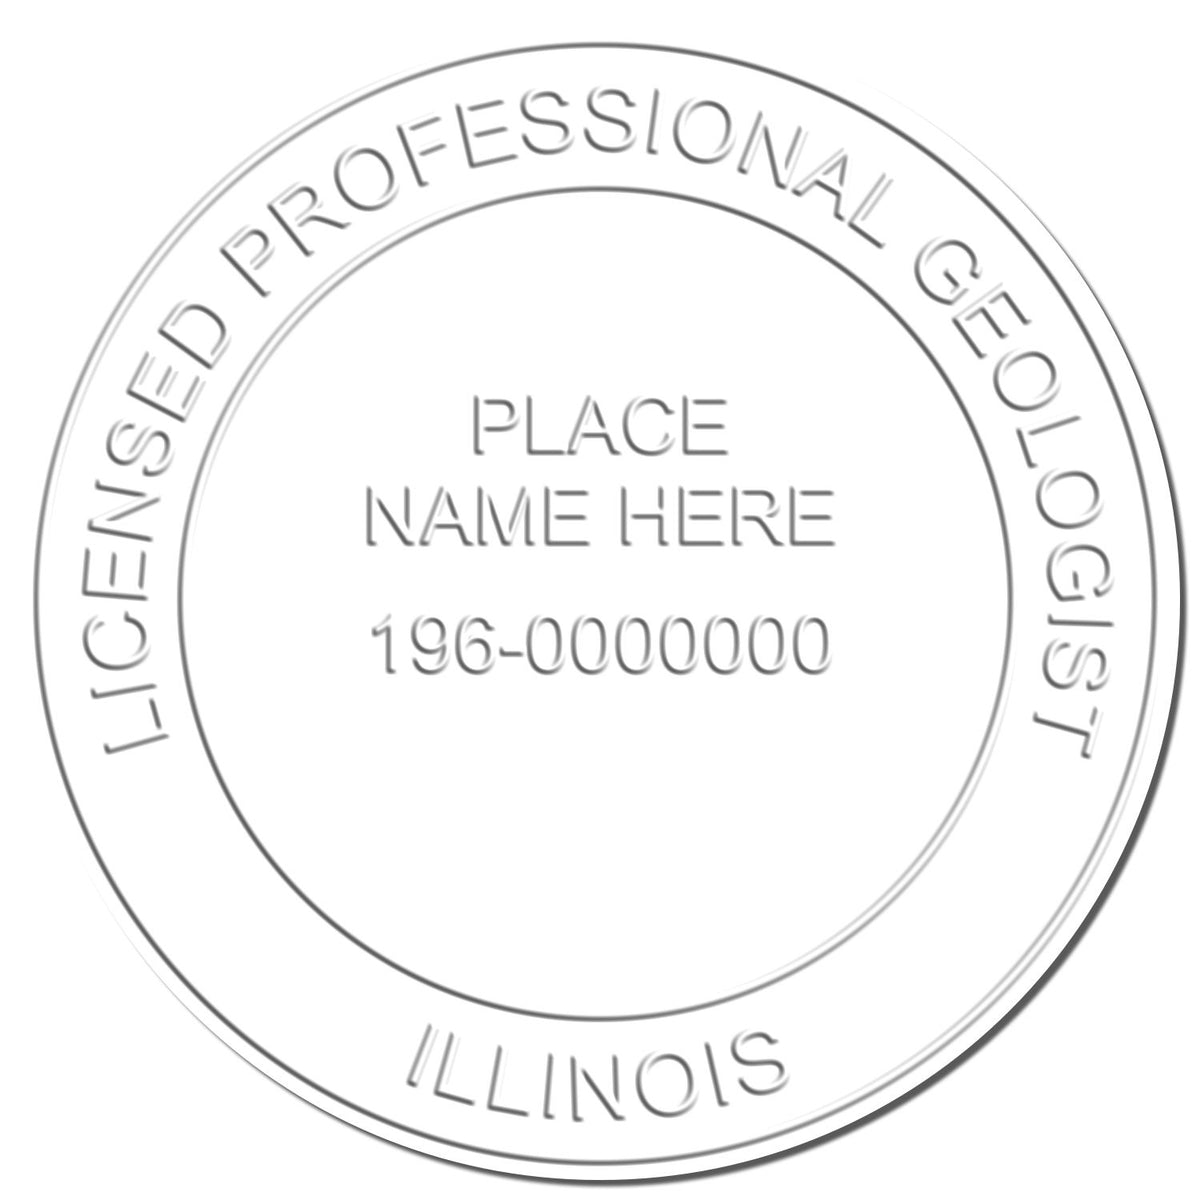 A photograph of the Hybrid Illinois Geologist Seal stamp impression reveals a vivid, professional image of the on paper.